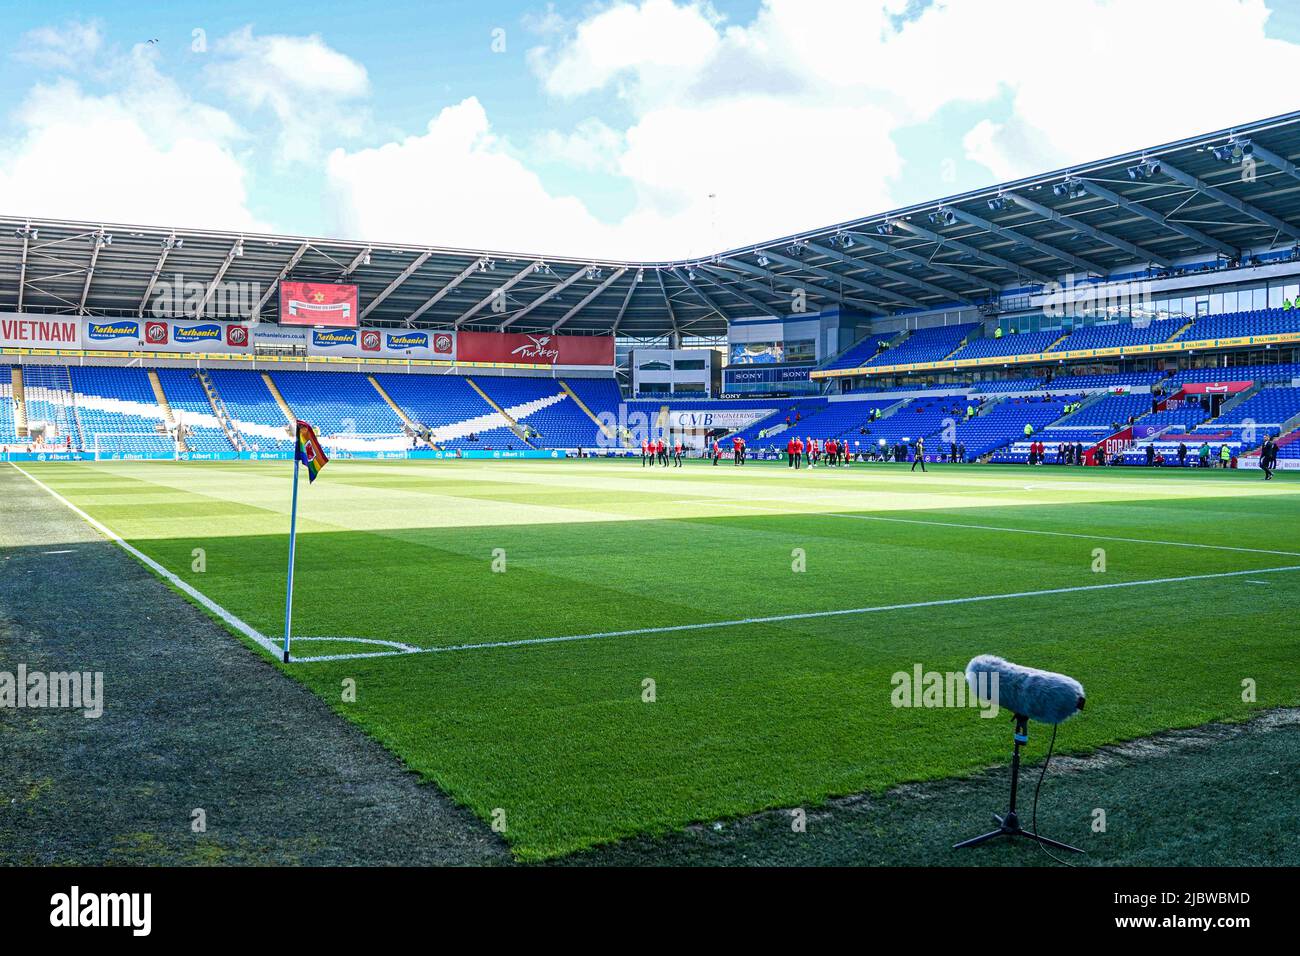 Download wallpapers Cardiff City Stadium, football stadium, grandstand,  Wales, United Kingdom, sports arena for desktop free. Pictures for desktop  free